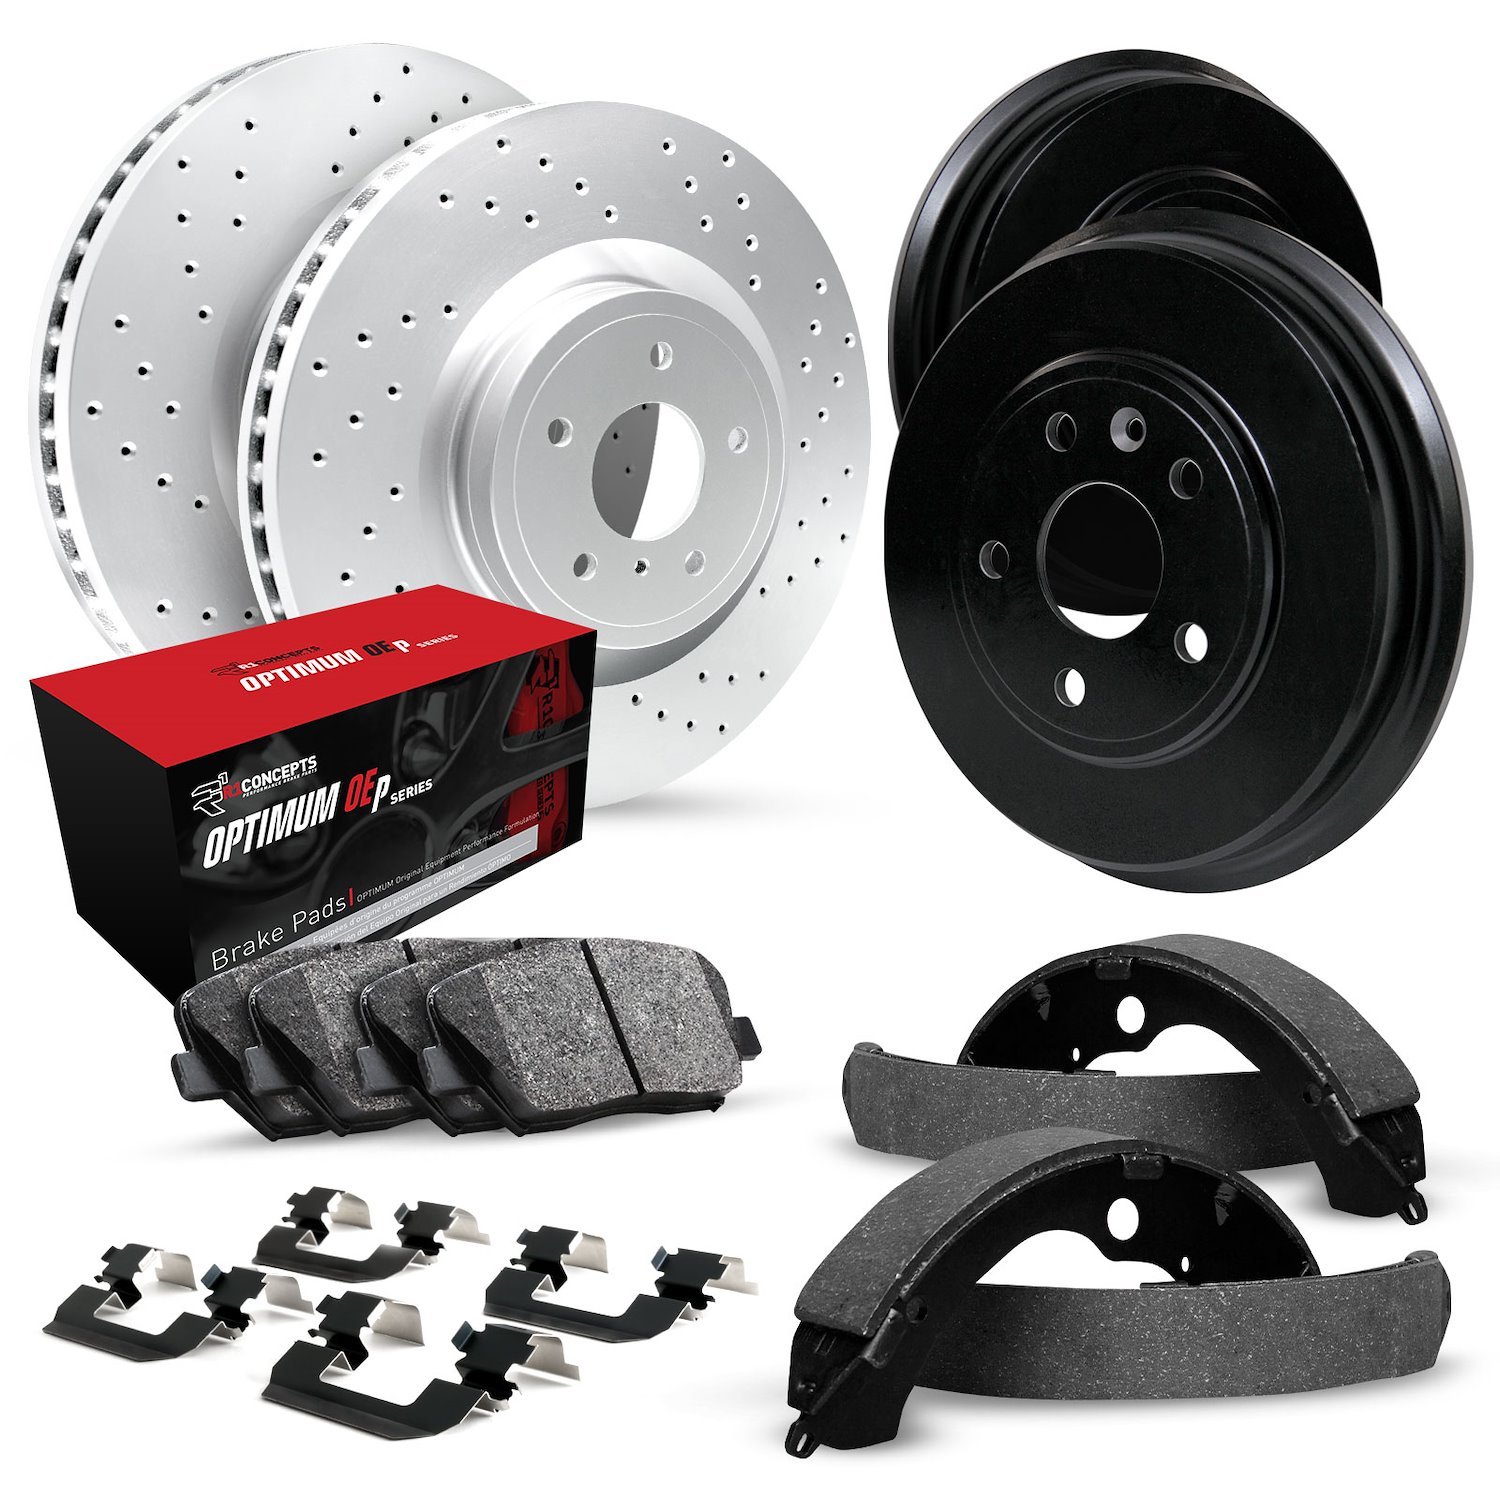 GEO-Carbon Drilled Brake Rotor & Drum Set w/Optimum OE Pads, Shoes, & Hardware, 1981-1992 GM, Position: Front & Rear